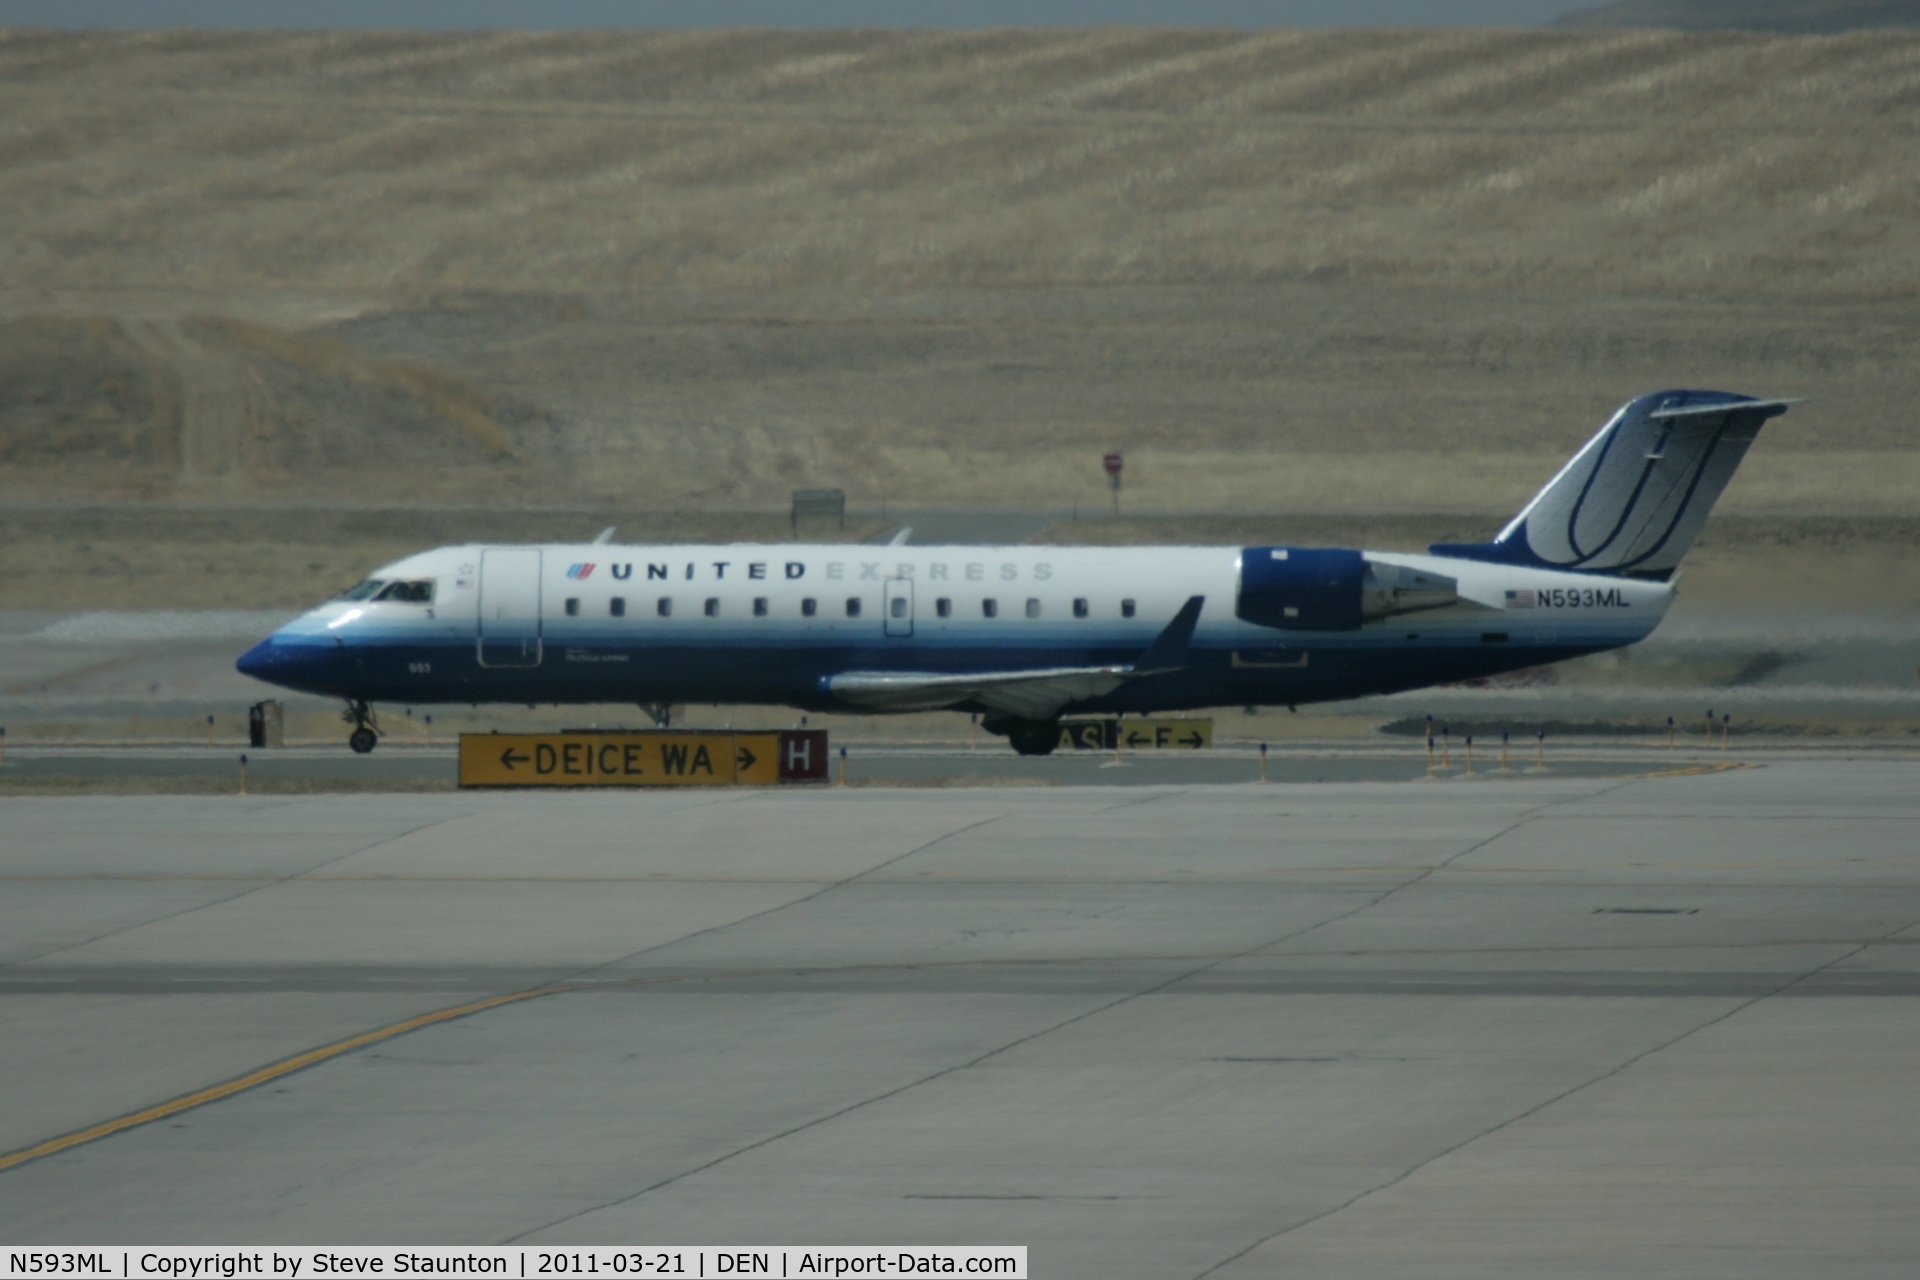 N593ML, 2001 Bombardier CRJ-200ER (CL-600-2B19) C/N 7465, Taken at Denver International Airport, in March 2011 whilst on an Aeroprint Aviation tour